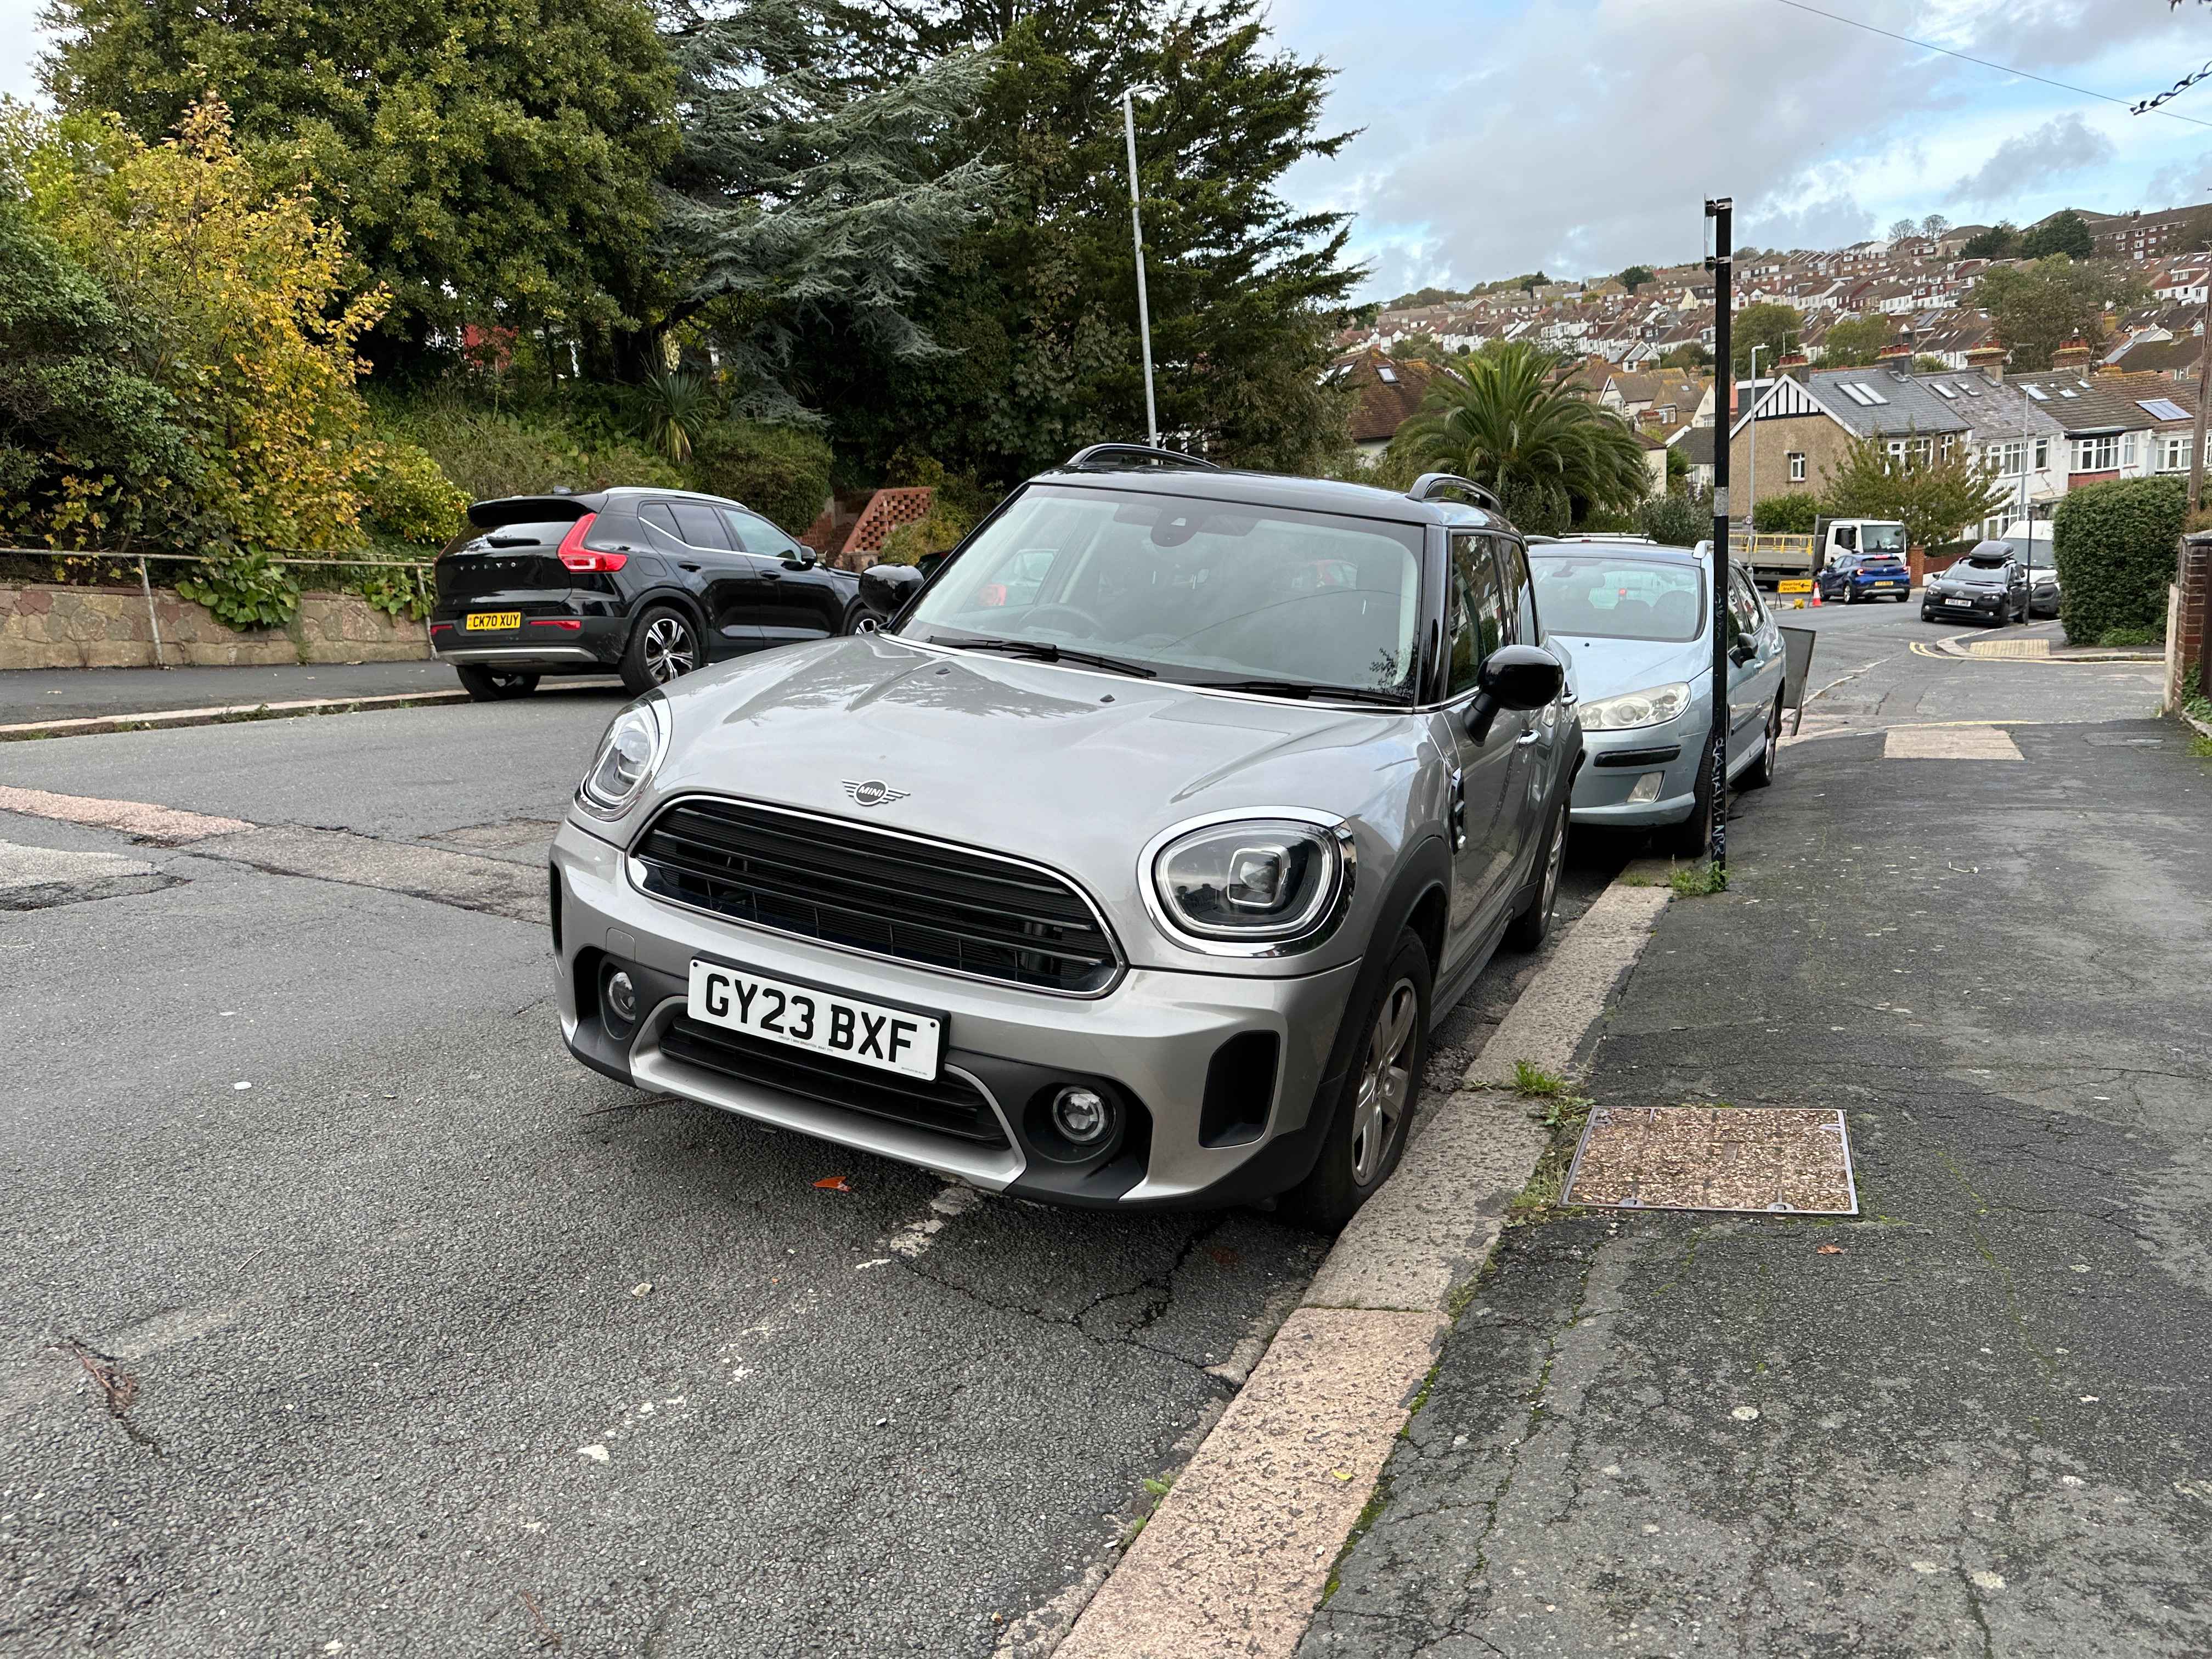 Photograph of GY23 BXF - a Grey Mini Countryman parked in Hollingdean by a non-resident who uses the local area as part of their Brighton commute. The first of eight photographs supplied by the residents of Hollingdean.